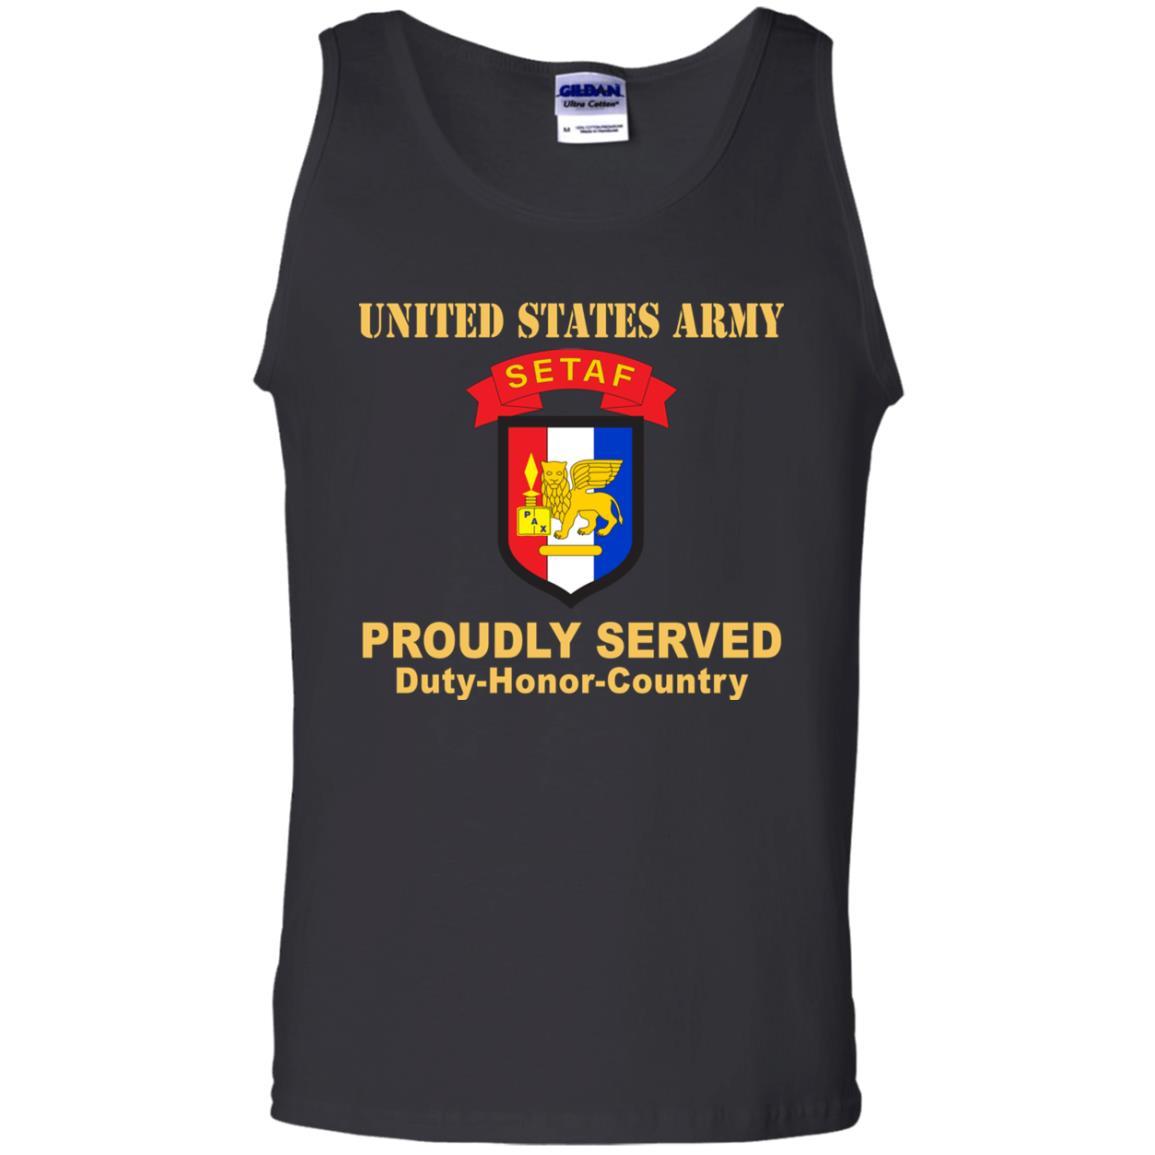 US ARMY USARAF-SETAF COMBAT SERVICE ID BADGE- Proudly Served T-Shirt On Front For Men-TShirt-Army-Veterans Nation